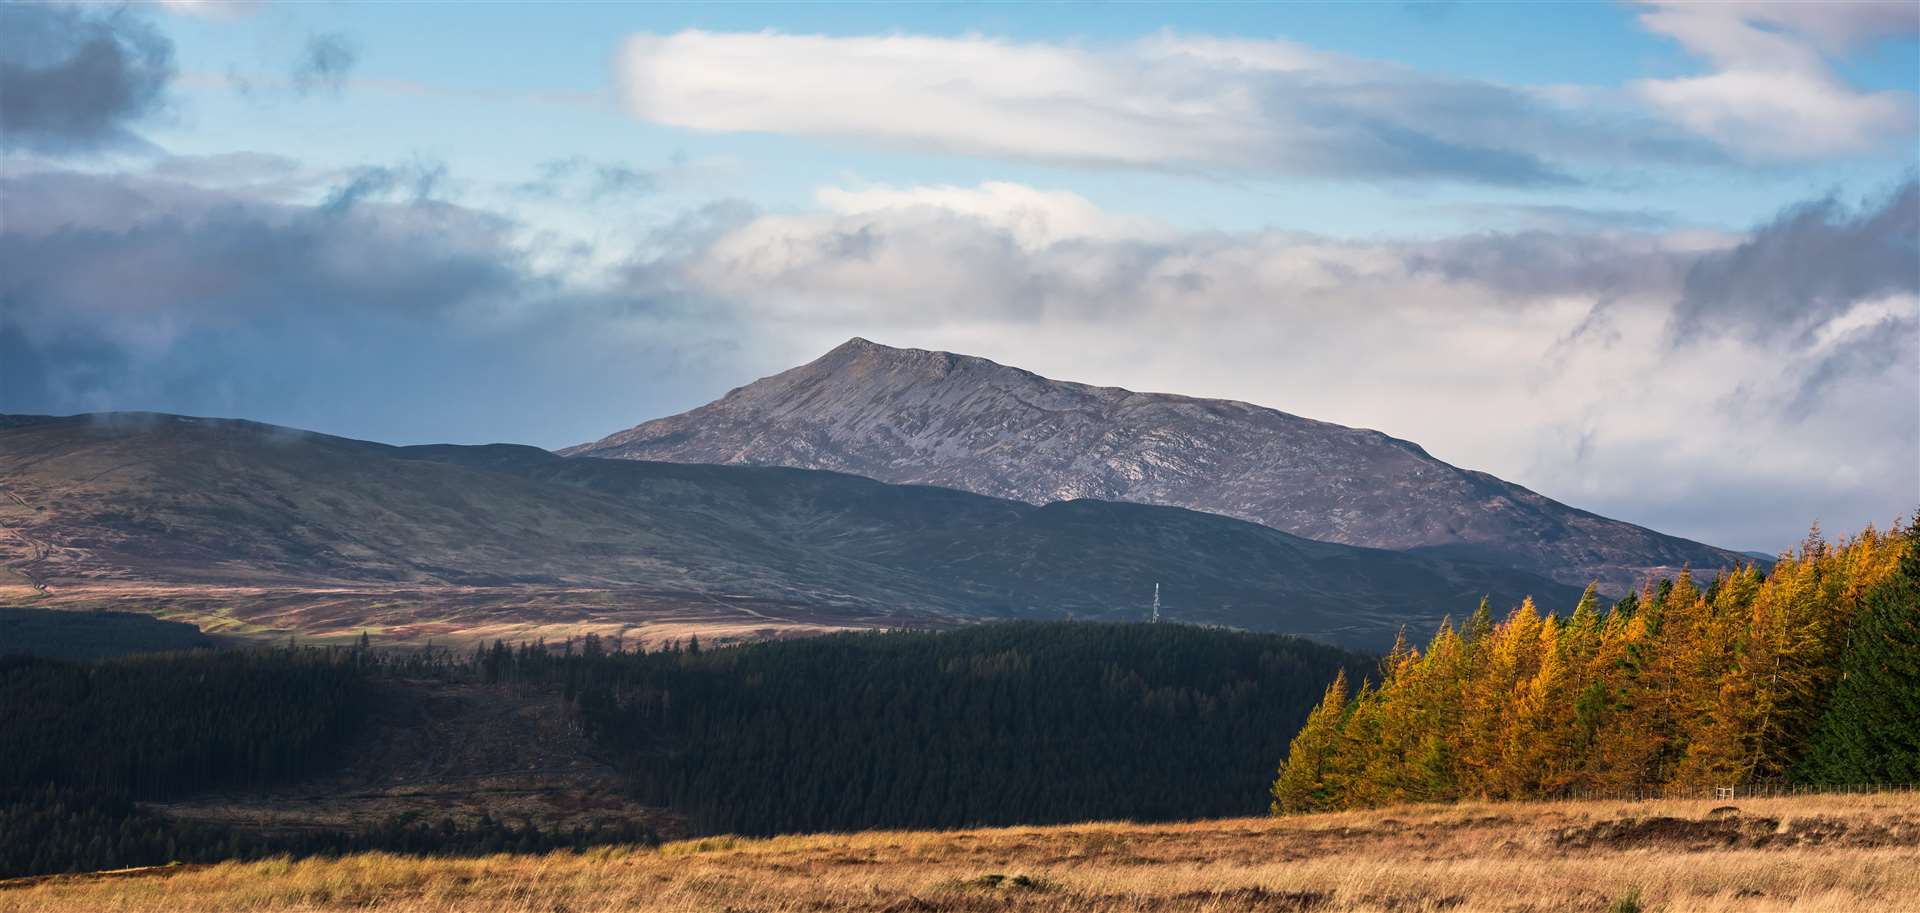 Repairs will take place to the mountain path on Schiehallion later in July.